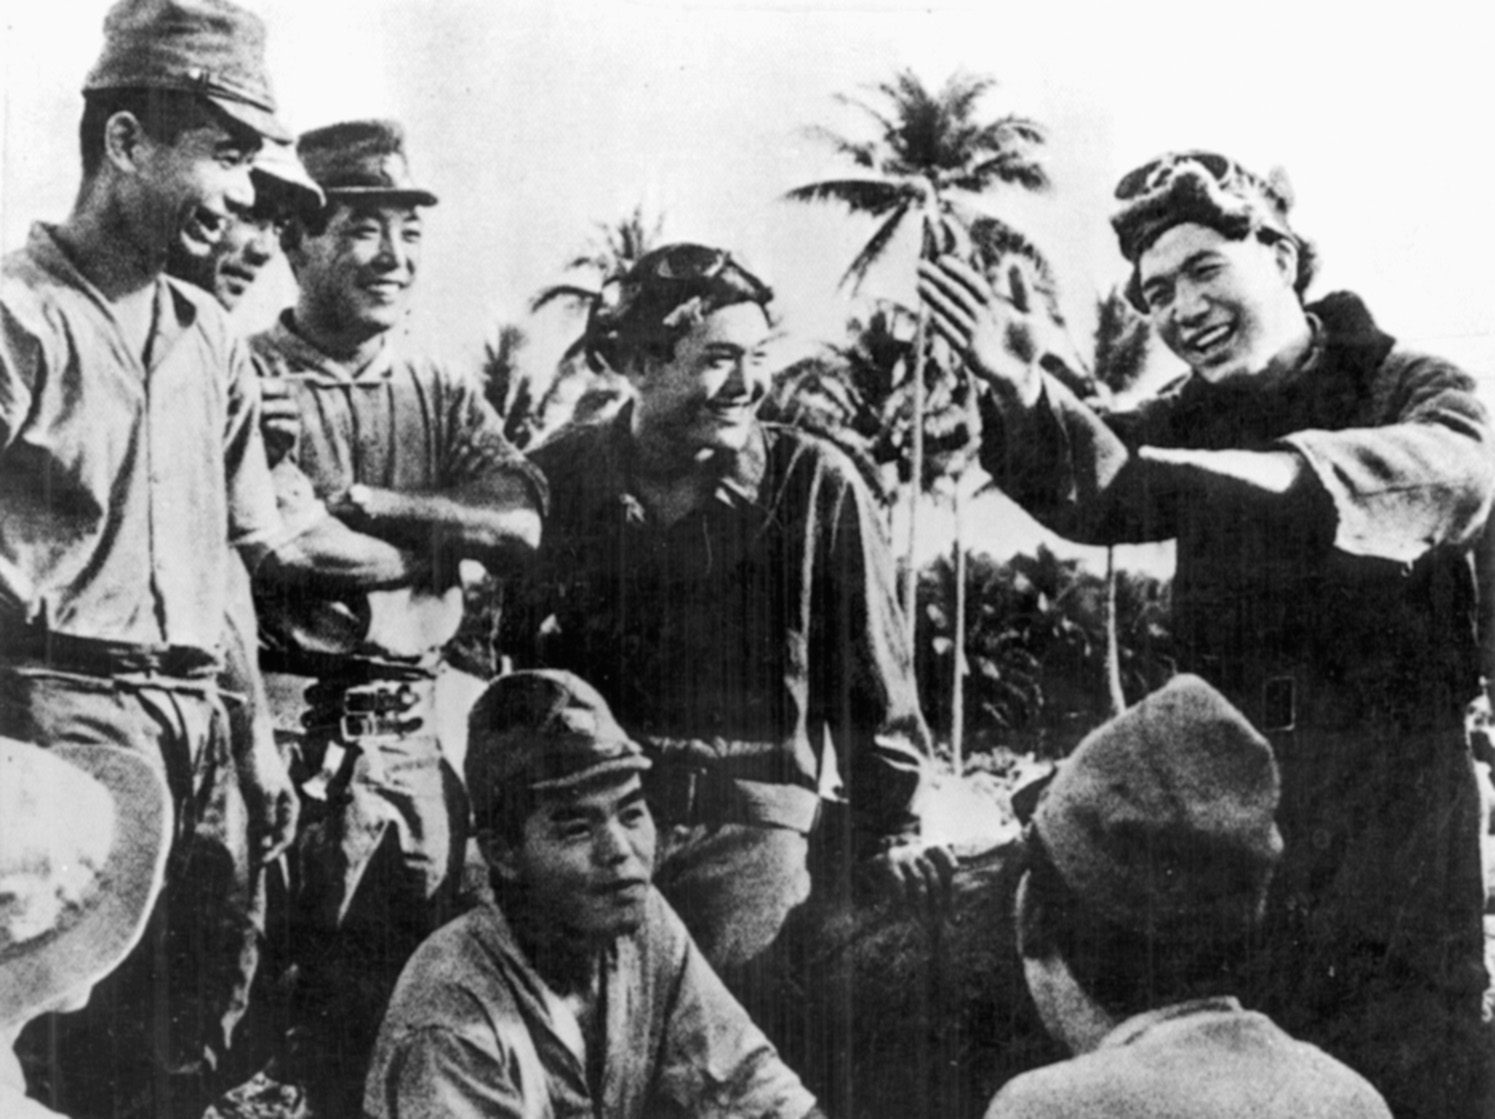 Japanese pilots smile as they listen to a comrade recount his experiences of aerial combat over Wake Island.